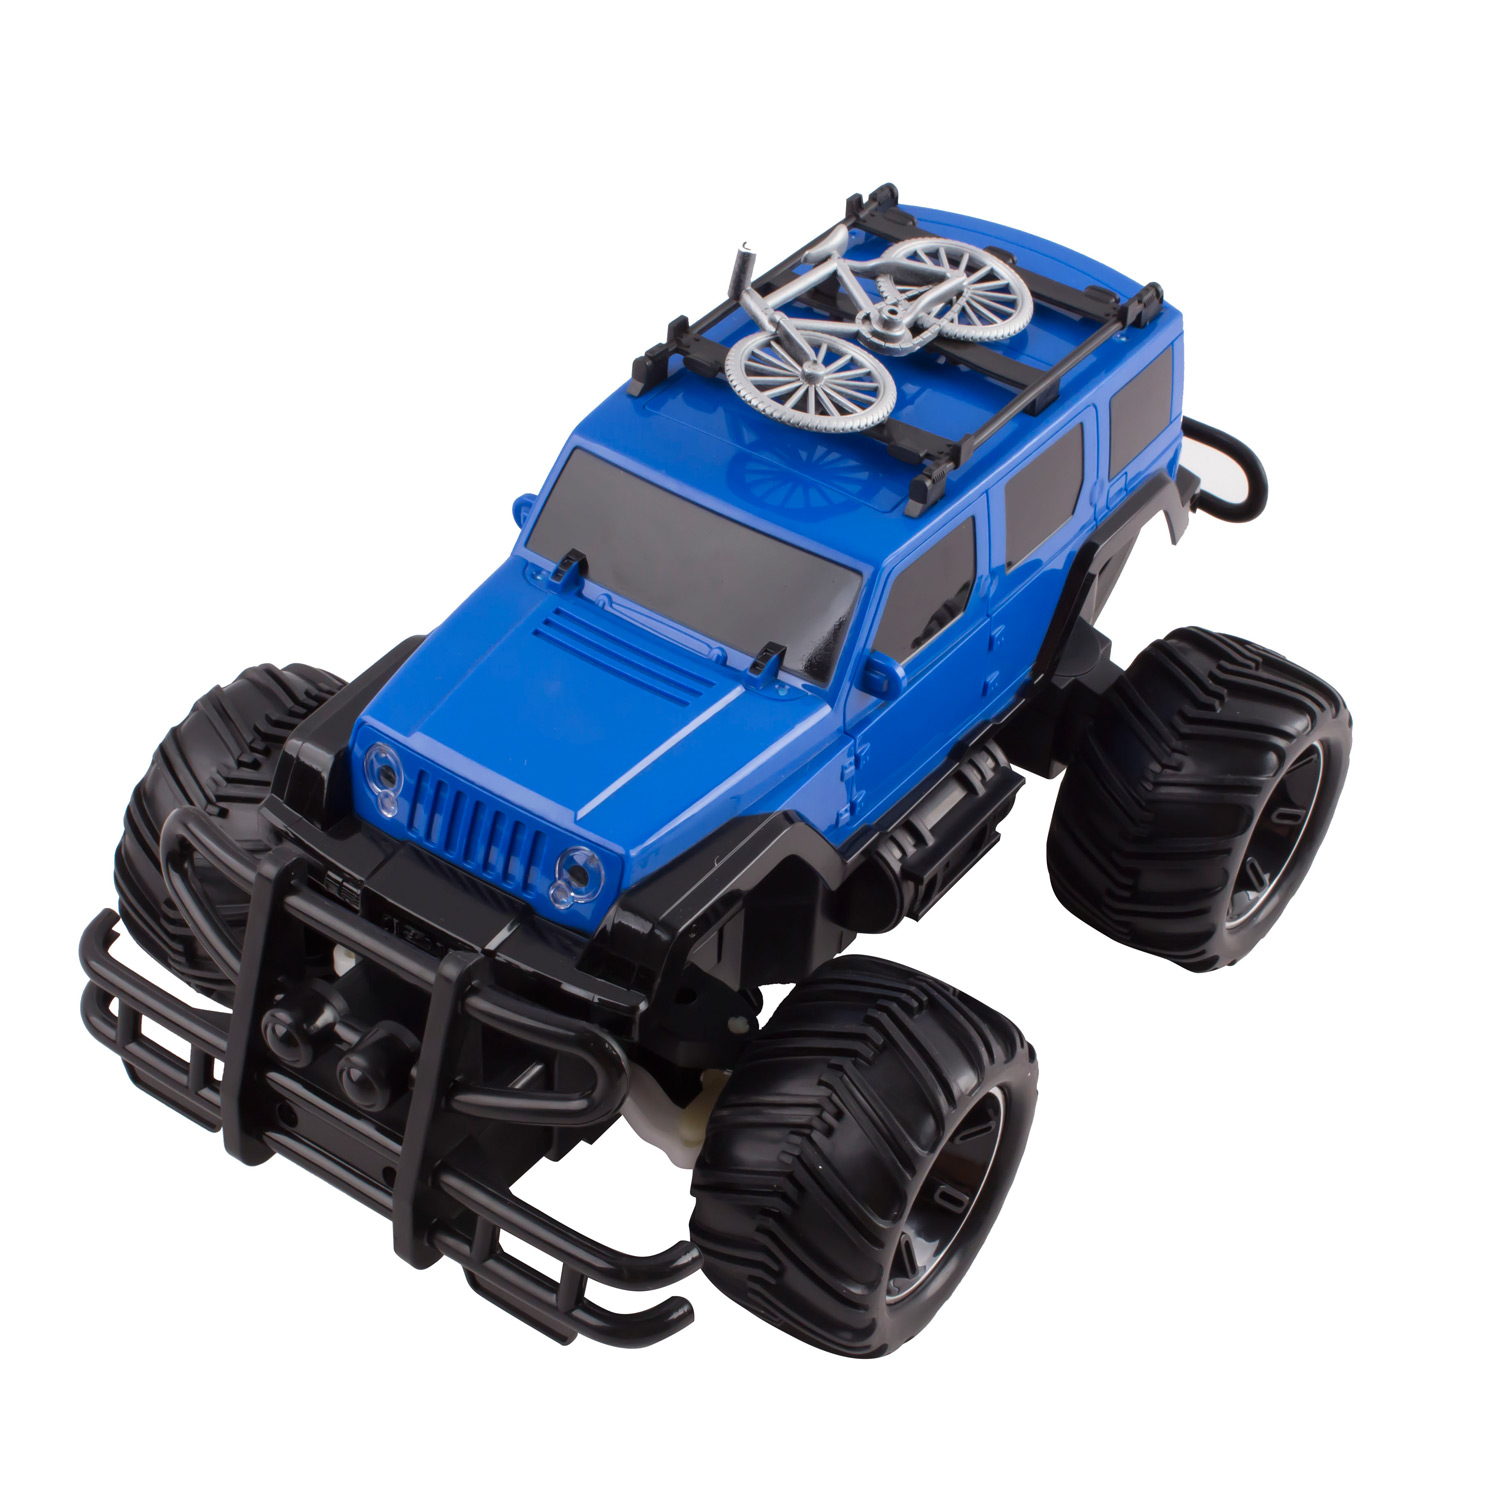 RC Truck Jeep Big Wheel Monster Remote Control Car With LED Headlights Ready to Run Includes Rechargeable Battery 116 Size Off-Road Beast Buggy Toy Blue 666-638A